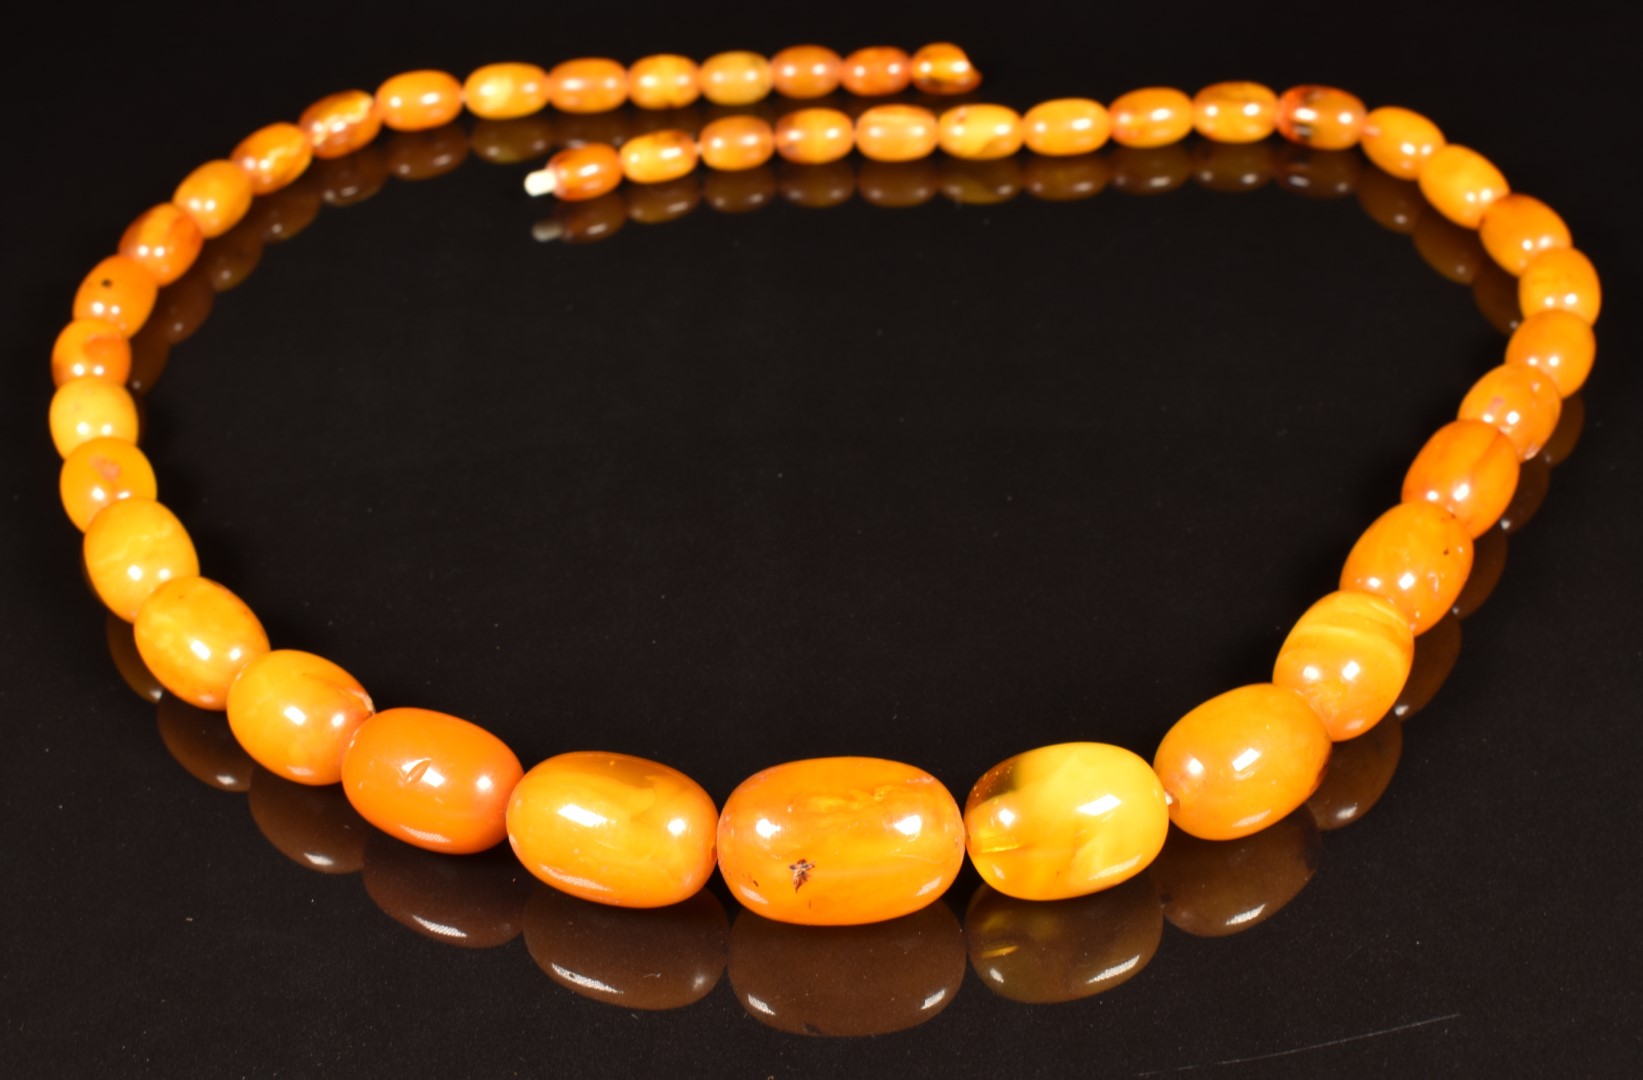 Baltic amber necklace made up of 41 oval beads, the largest 24 x 17mm, 48g